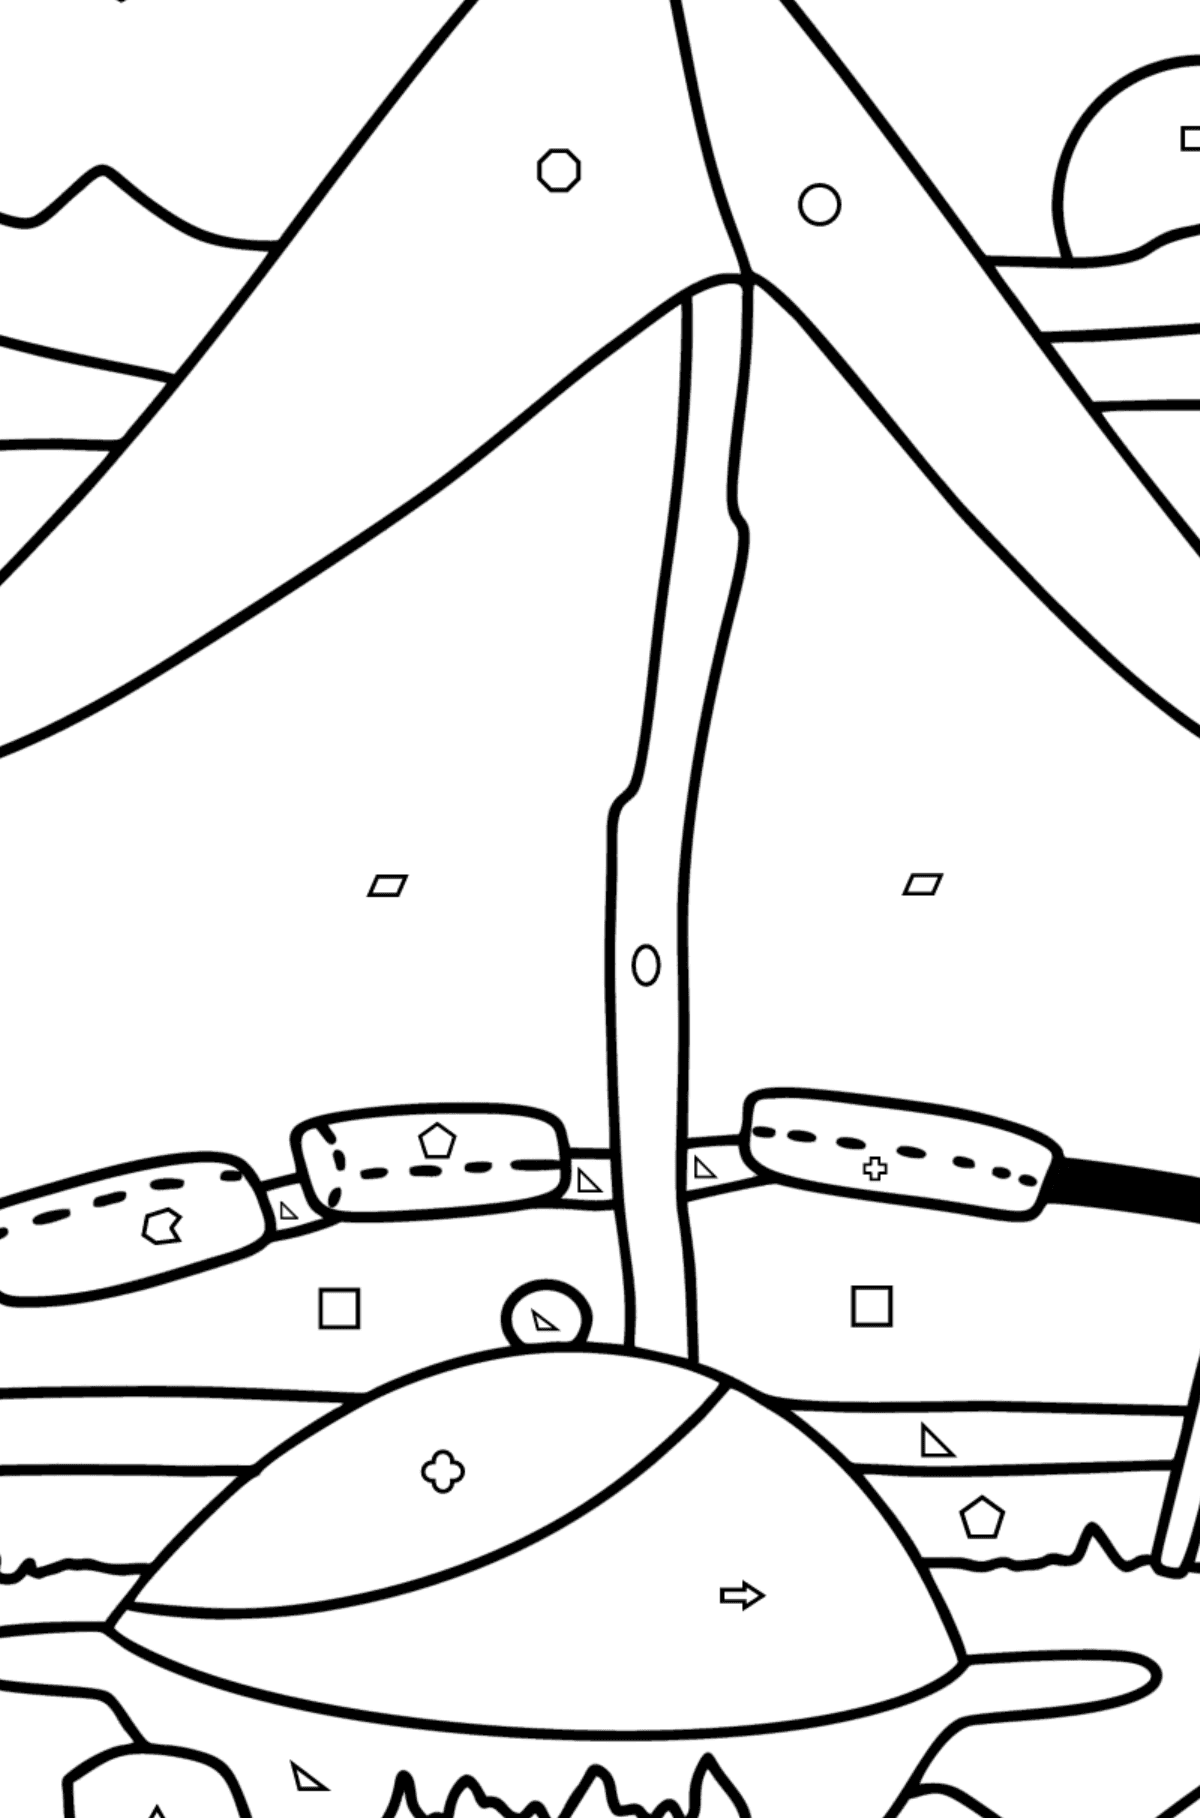 Bedouin tent coloring page - Coloring by Geometric Shapes for Kids